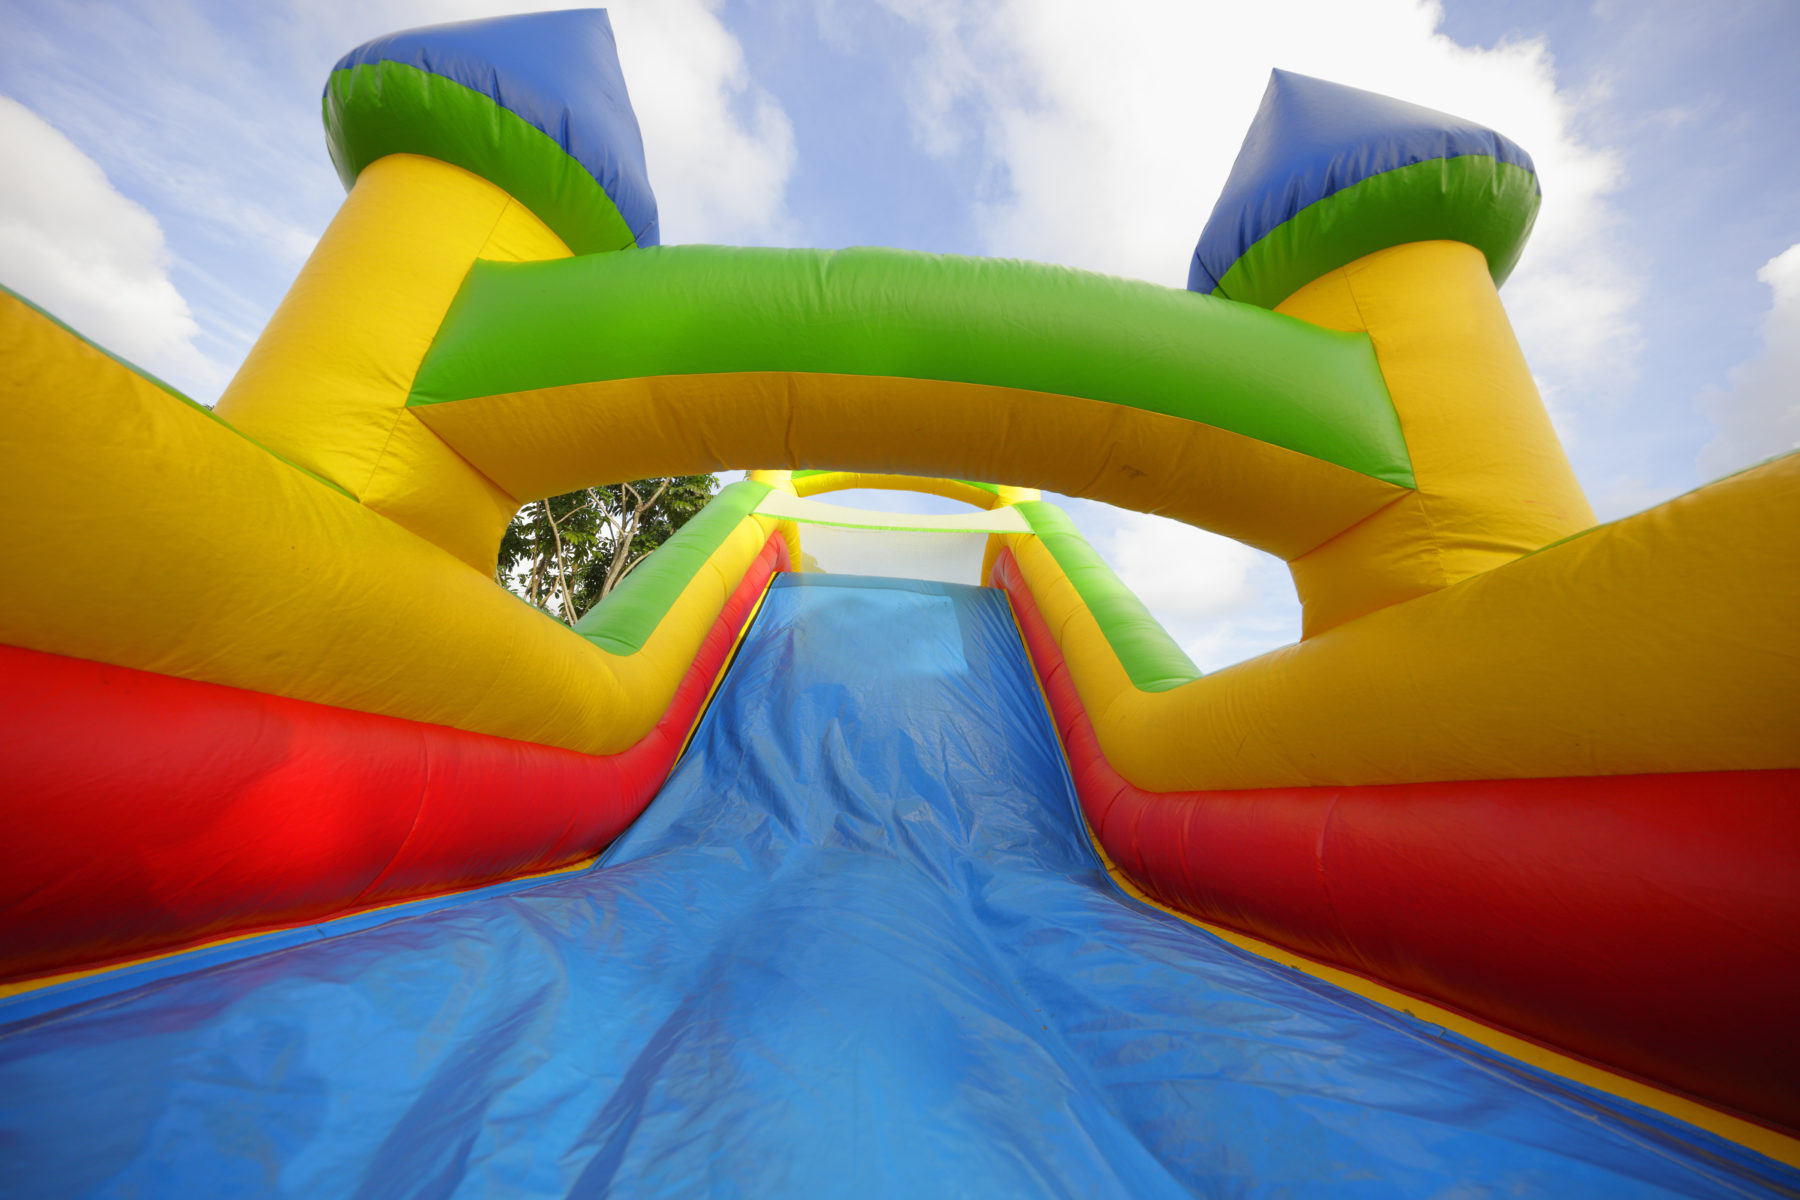 You are currently viewing Safety Tips for Inflatable Play Equipment